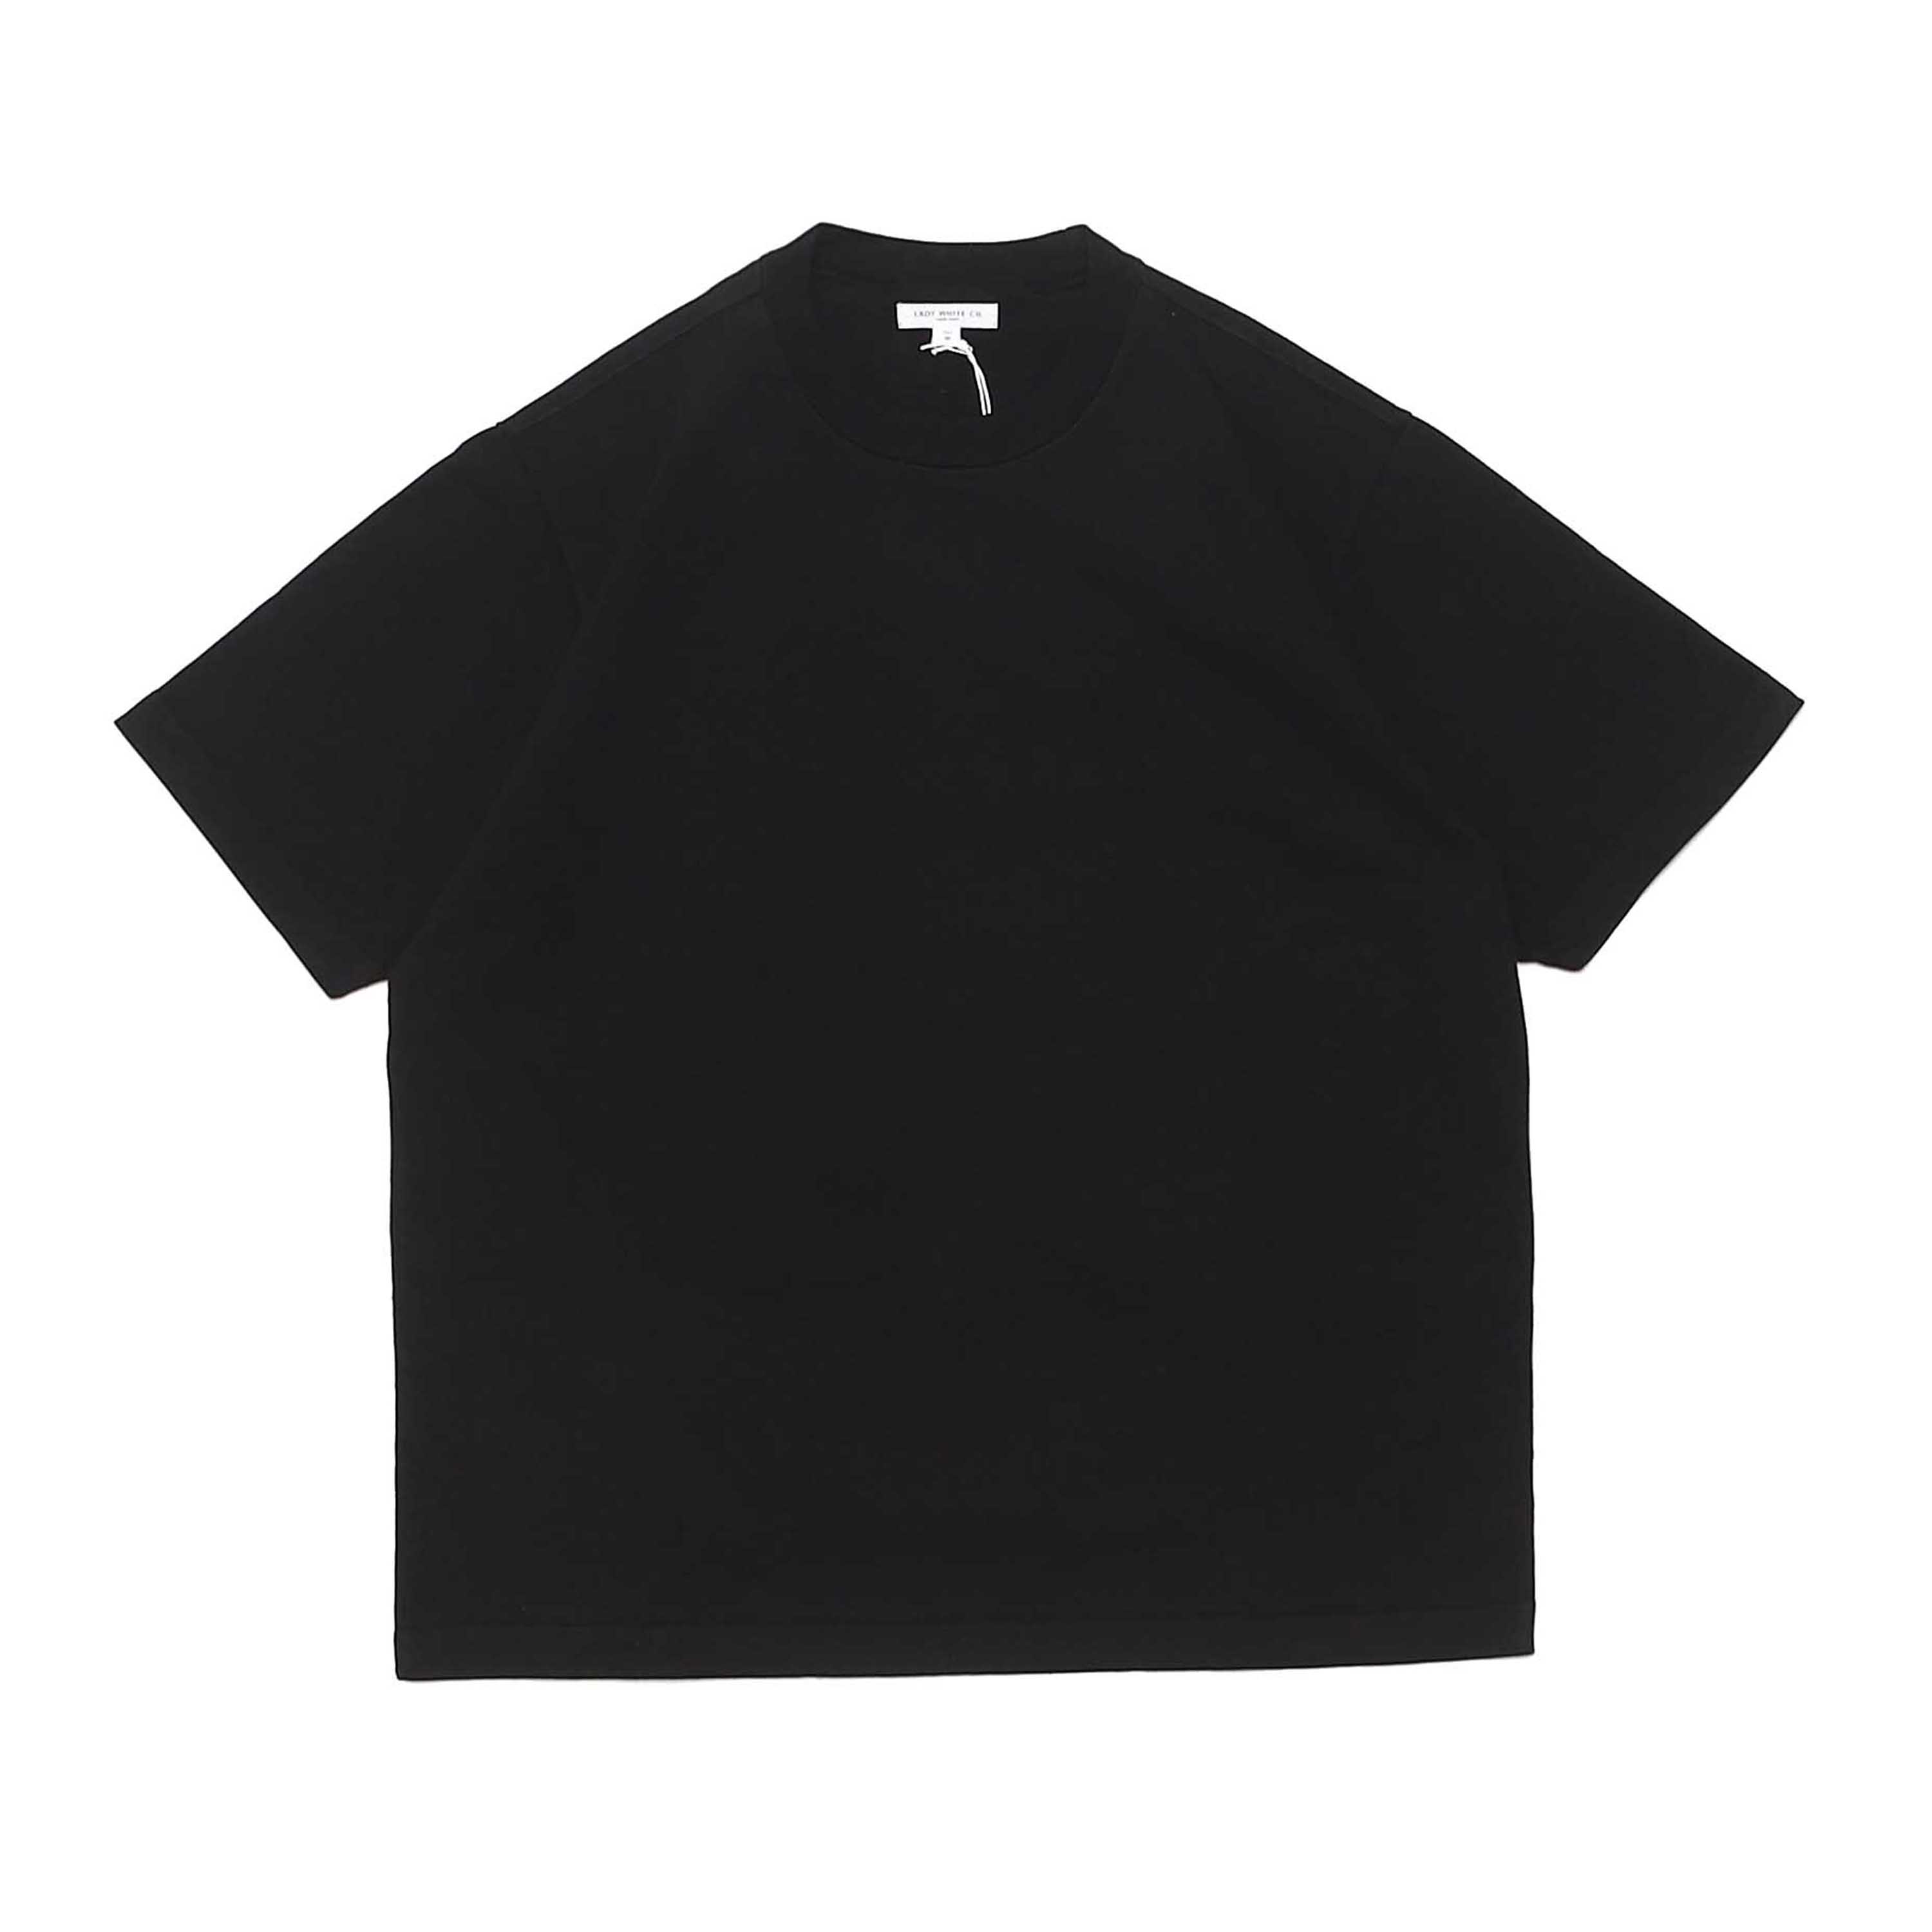 RUGBY S/S T-SHIRT - BLACK